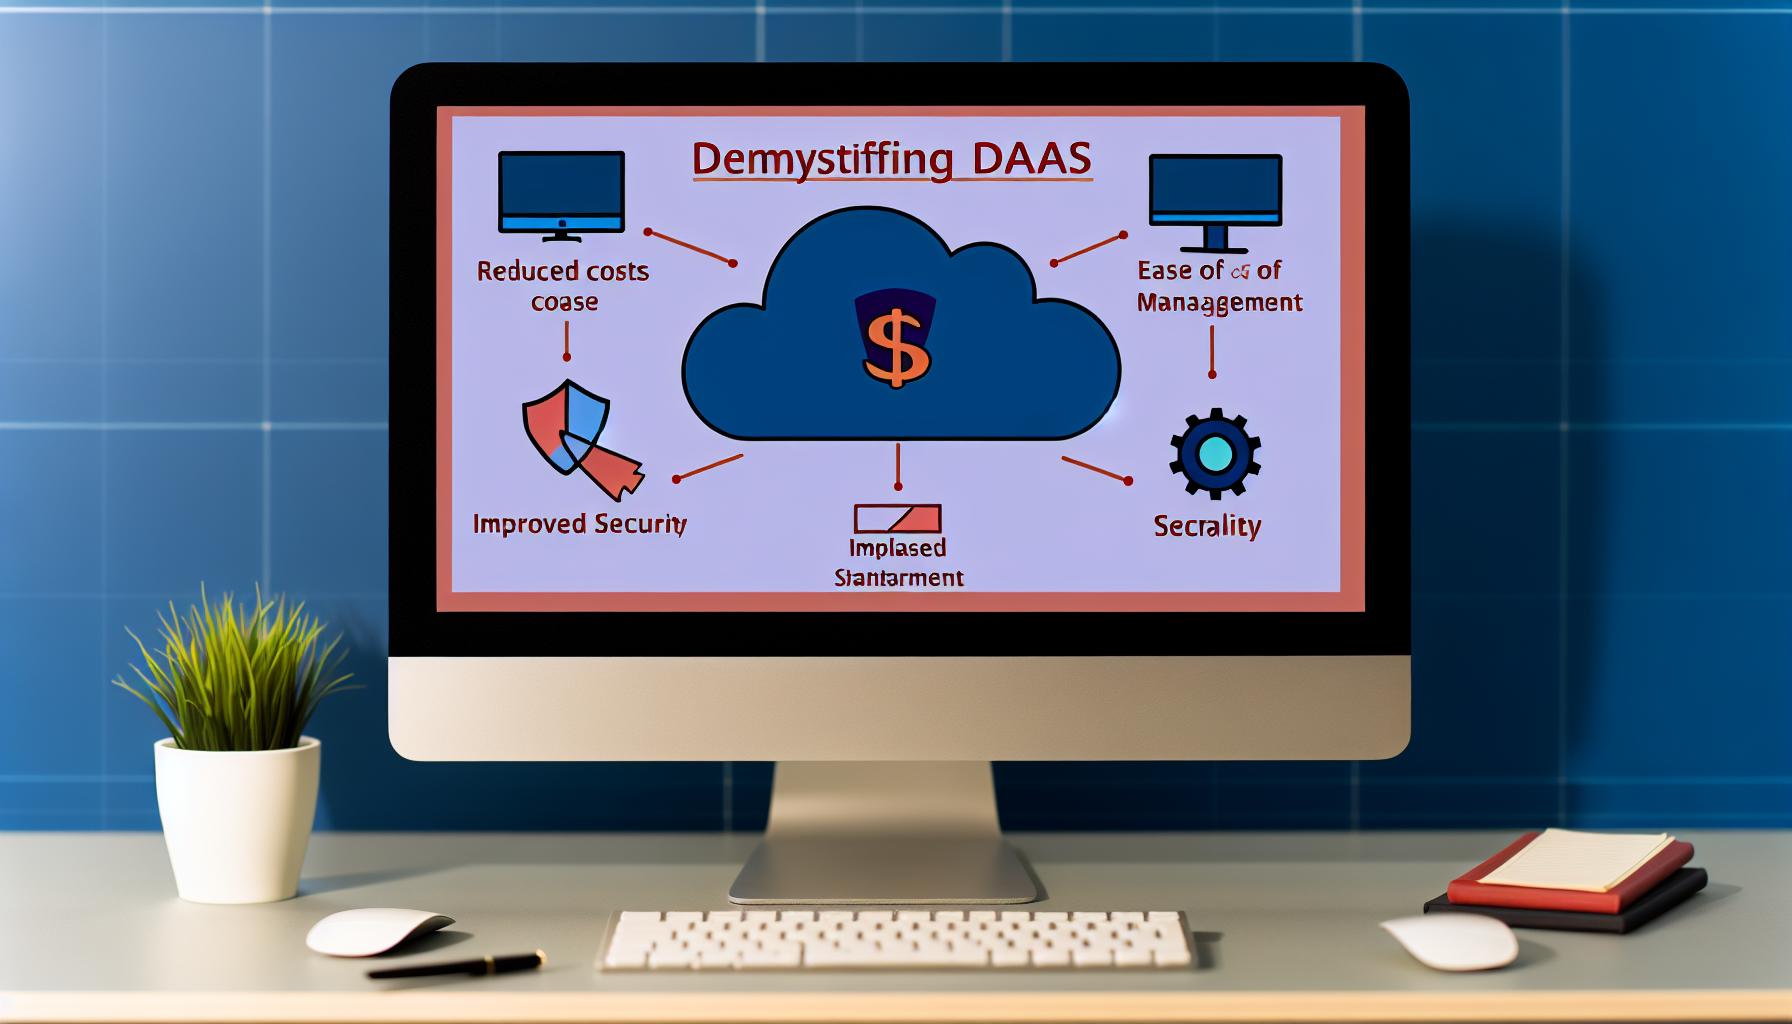 Demystifying DaaS: Exploring the Benefits of Desktop as a Service (Clone)